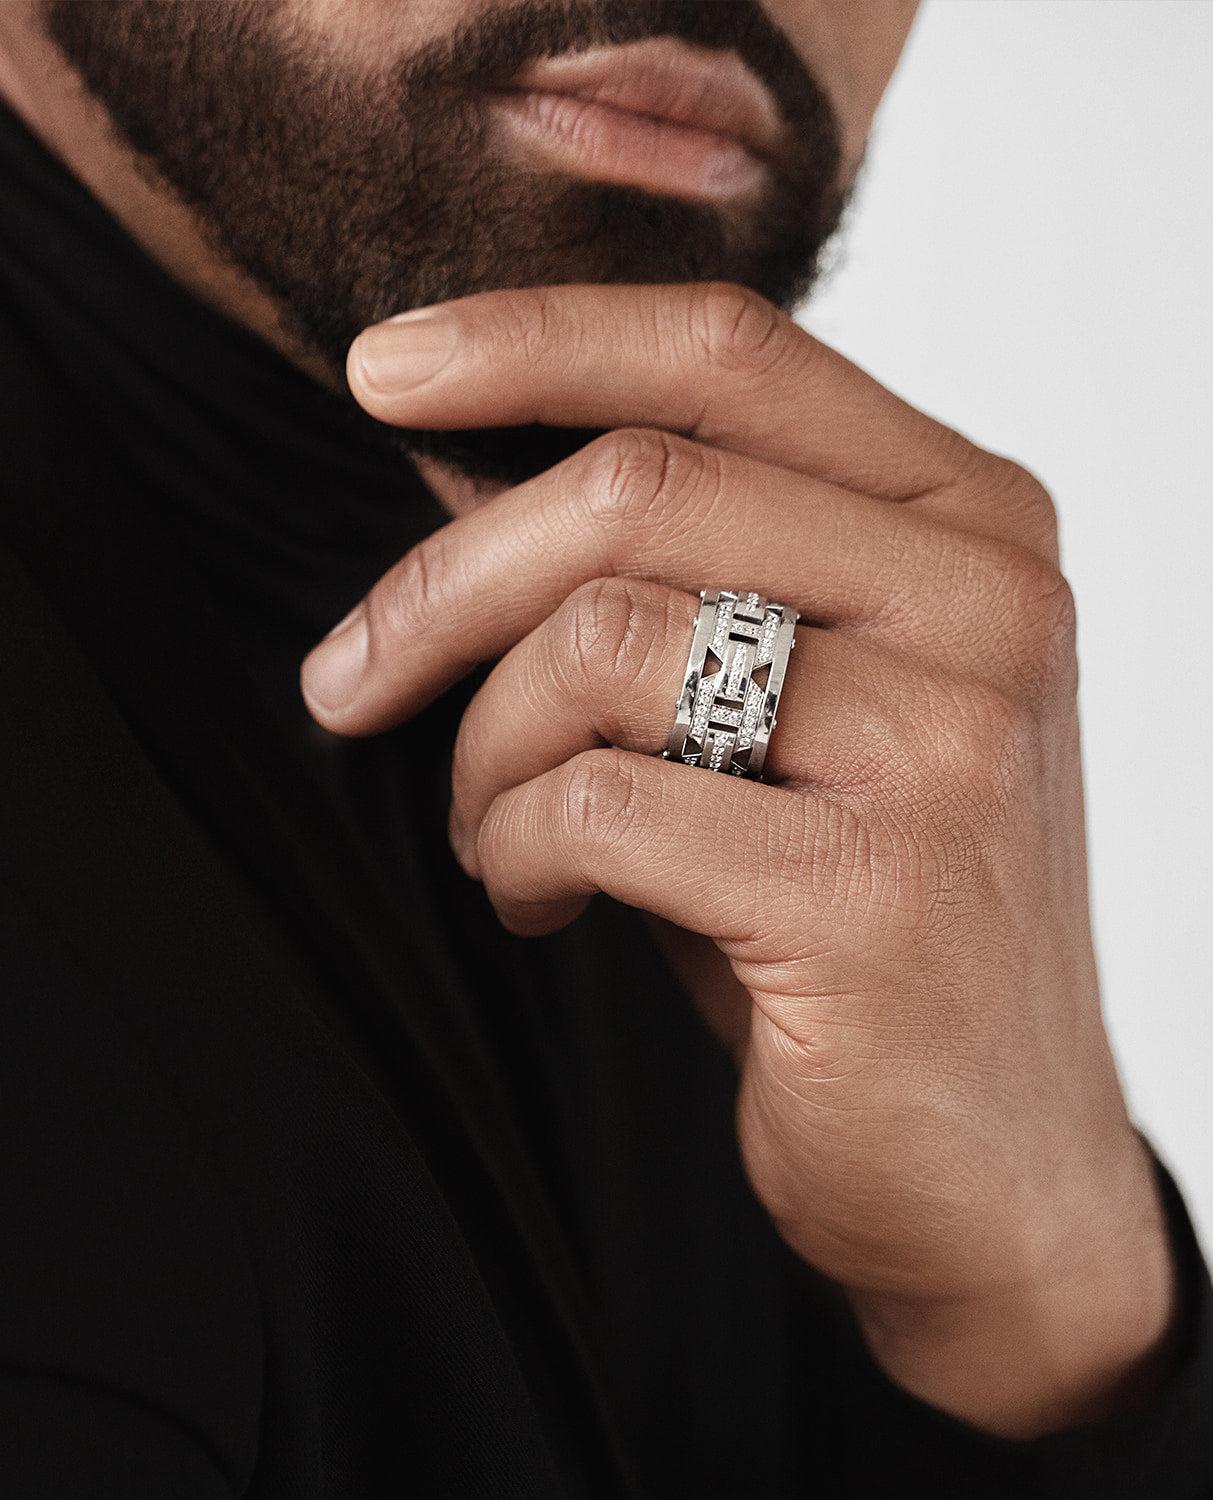 A truly unique design and fine workmanship are combined into one uniquely striking ring with 1.00ct pave set round brilliant cut white diamonds. The Briggs design makes an exceptional statement ring for nearly any occasion, from a night on the town